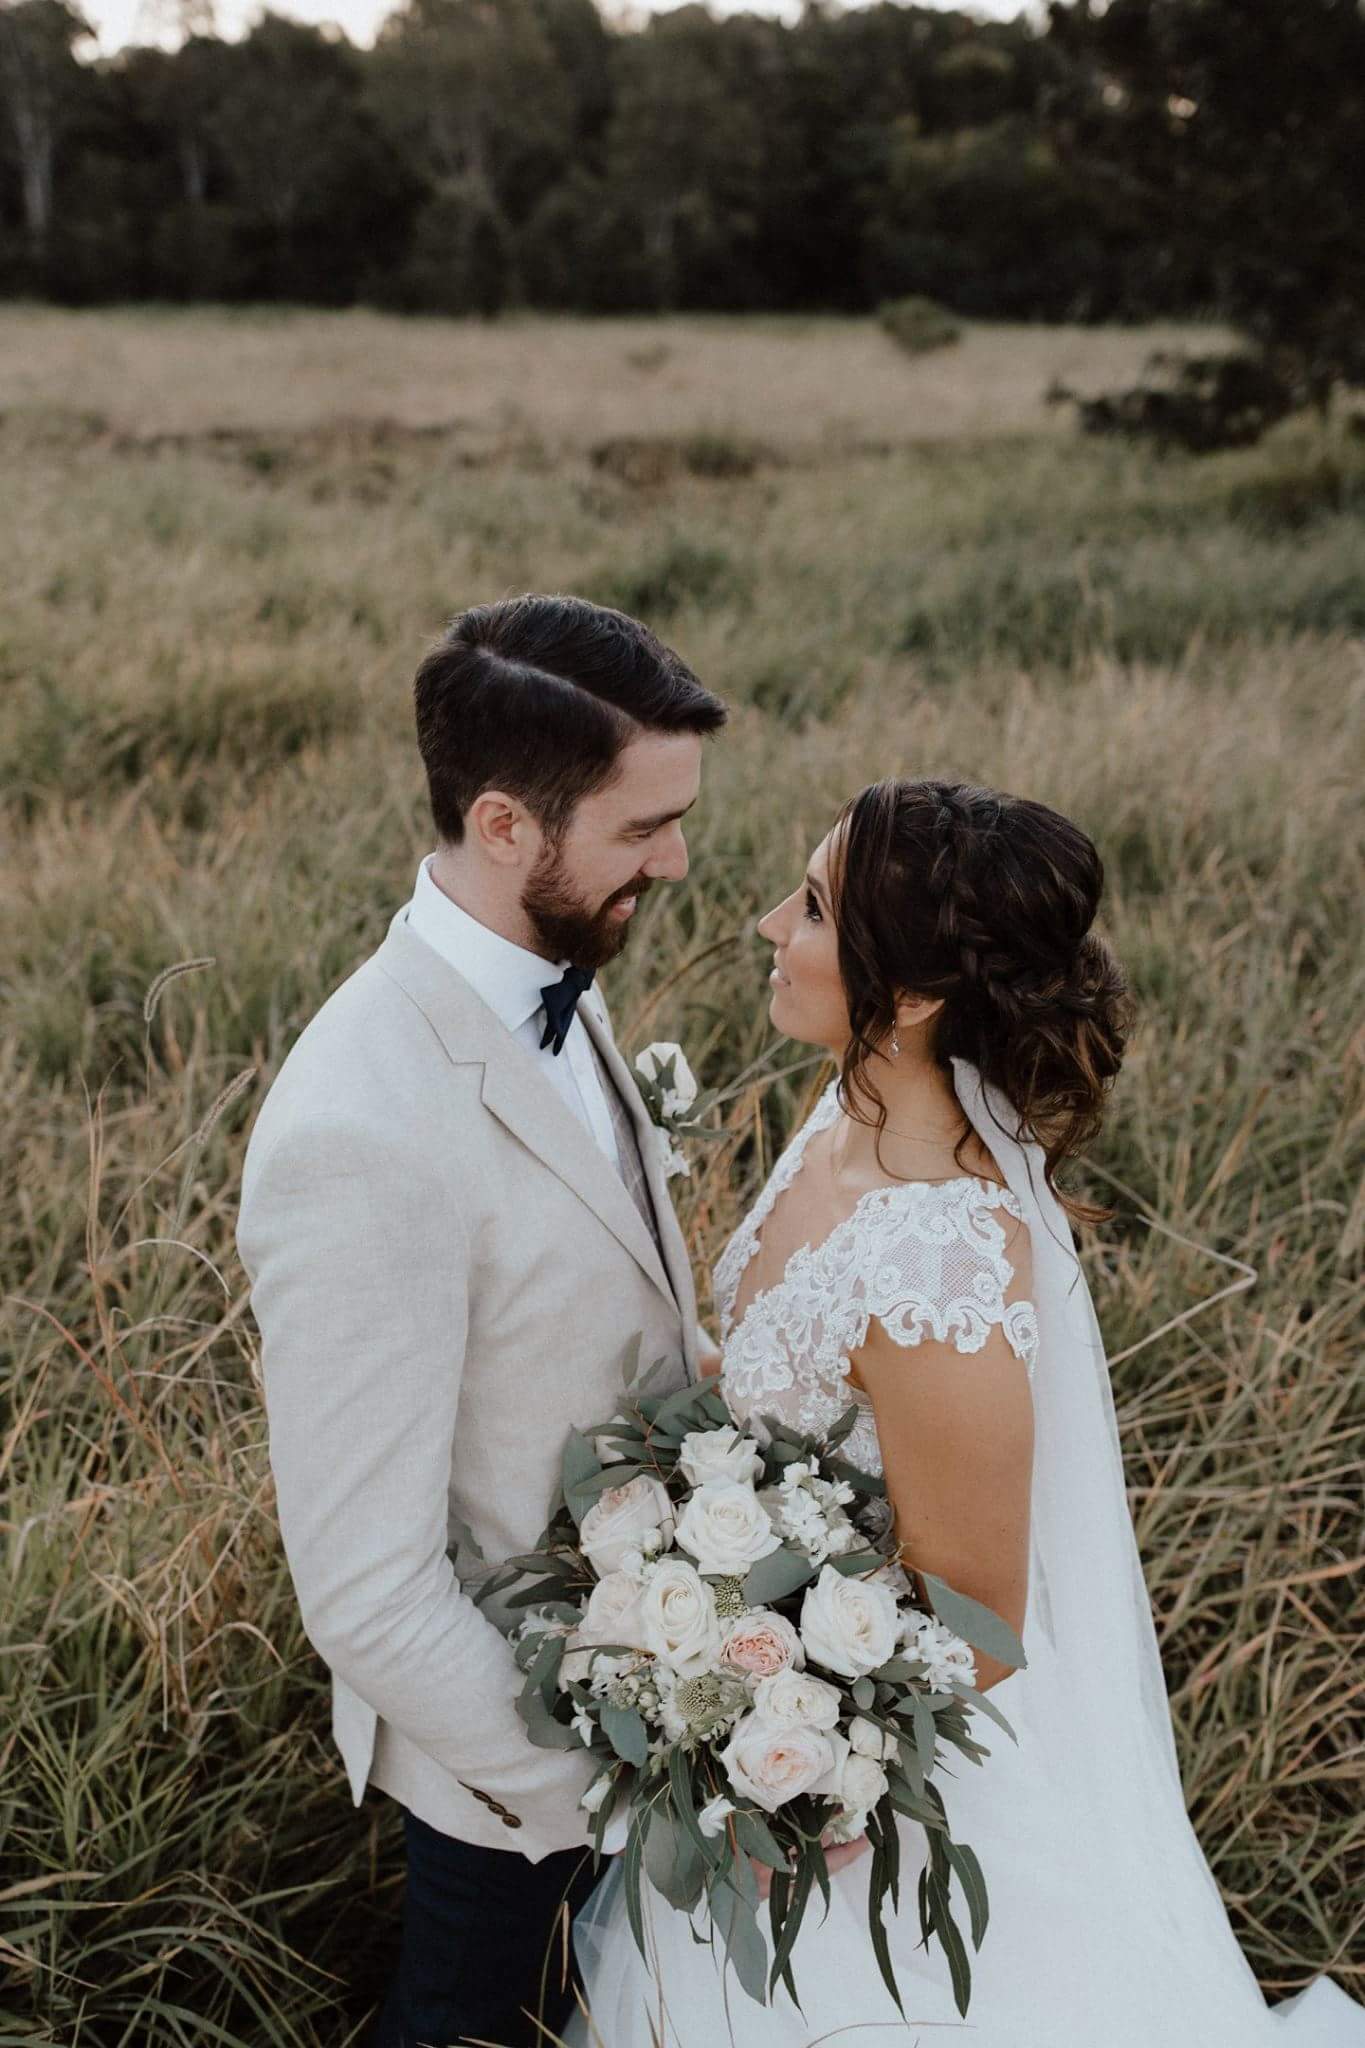 Chantelle and Sheldon are one of our beautiful couples we helped to make their dream day come true. Learn from those who have been through the wedding journey. All the in's and out's of creating your dream wedding.